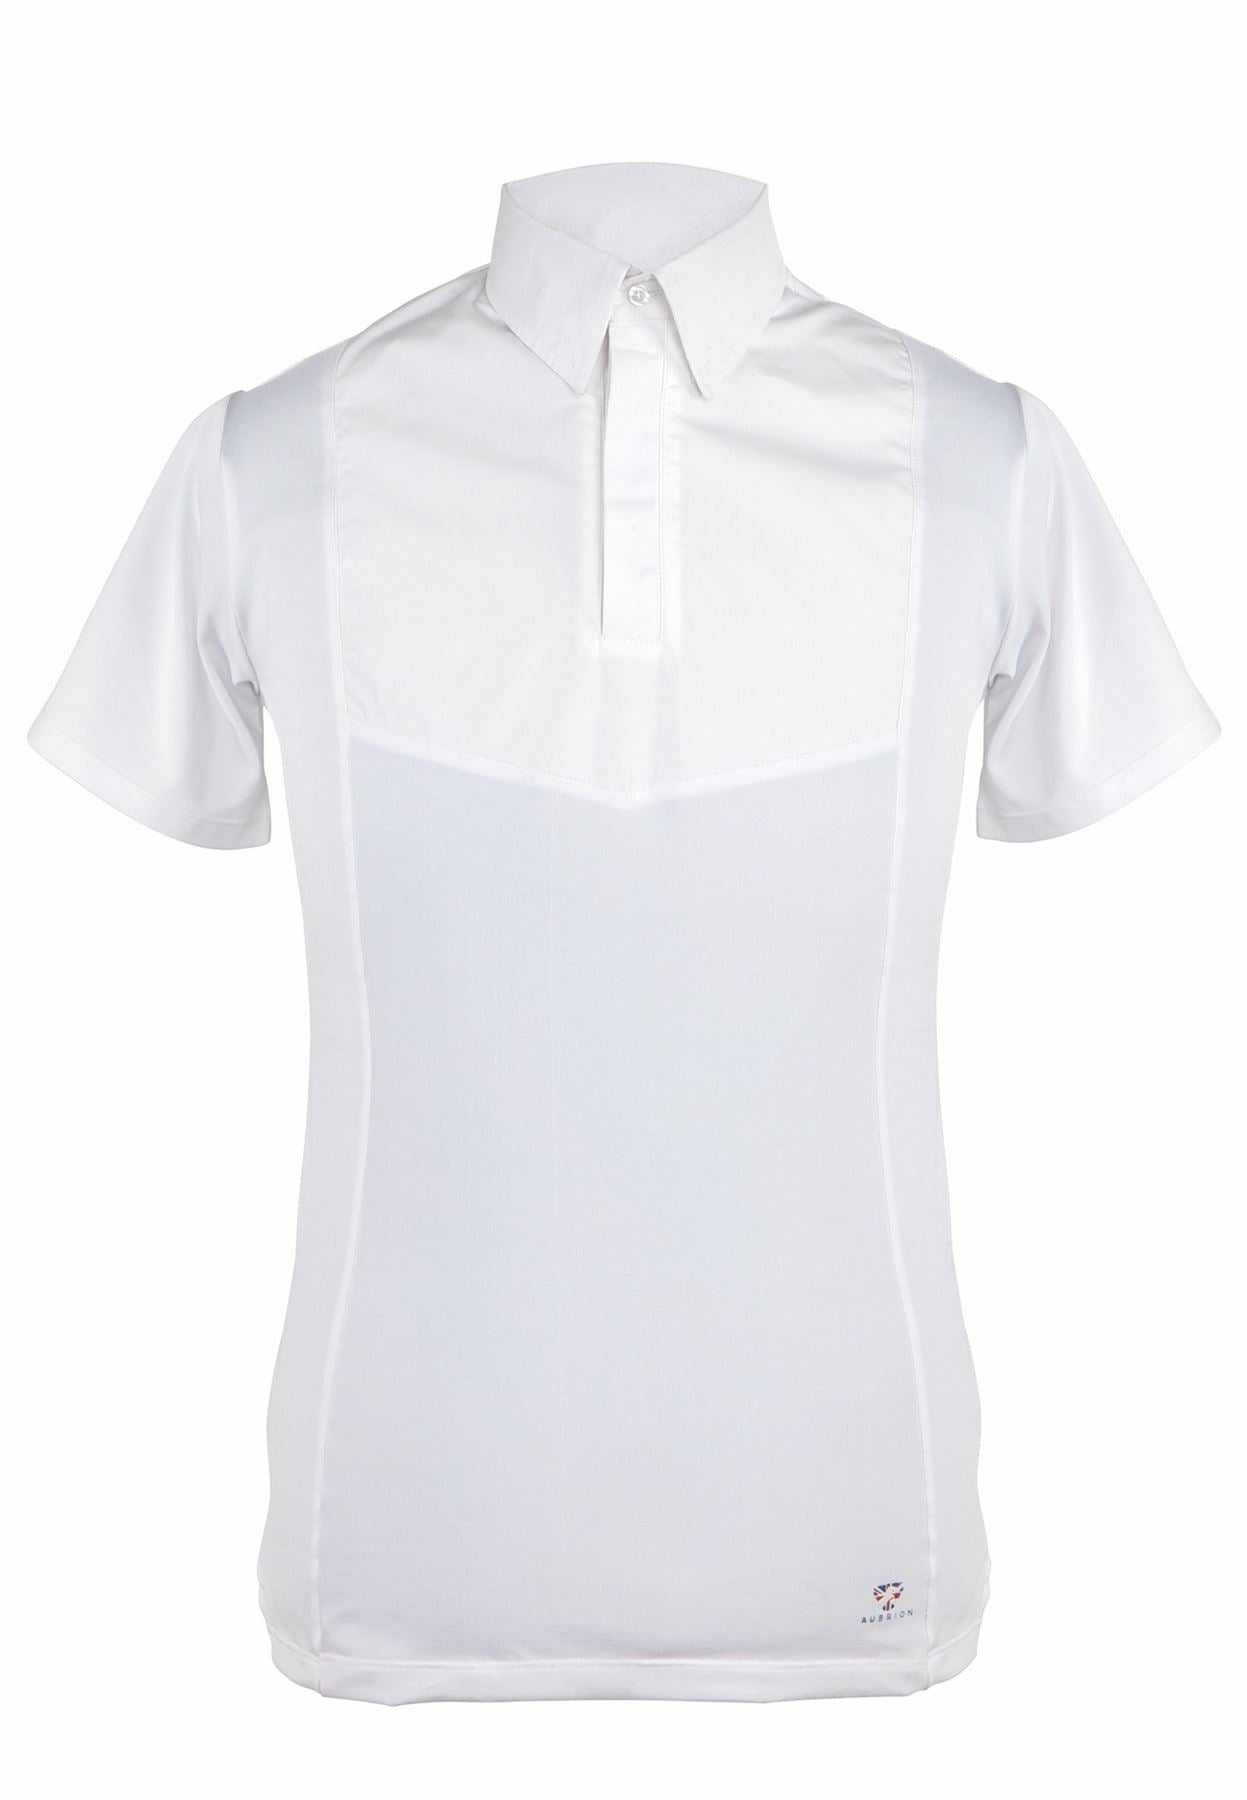 Shires Aubrion Short Sleeve Tie Shirt - Gents - Just Horse Riders